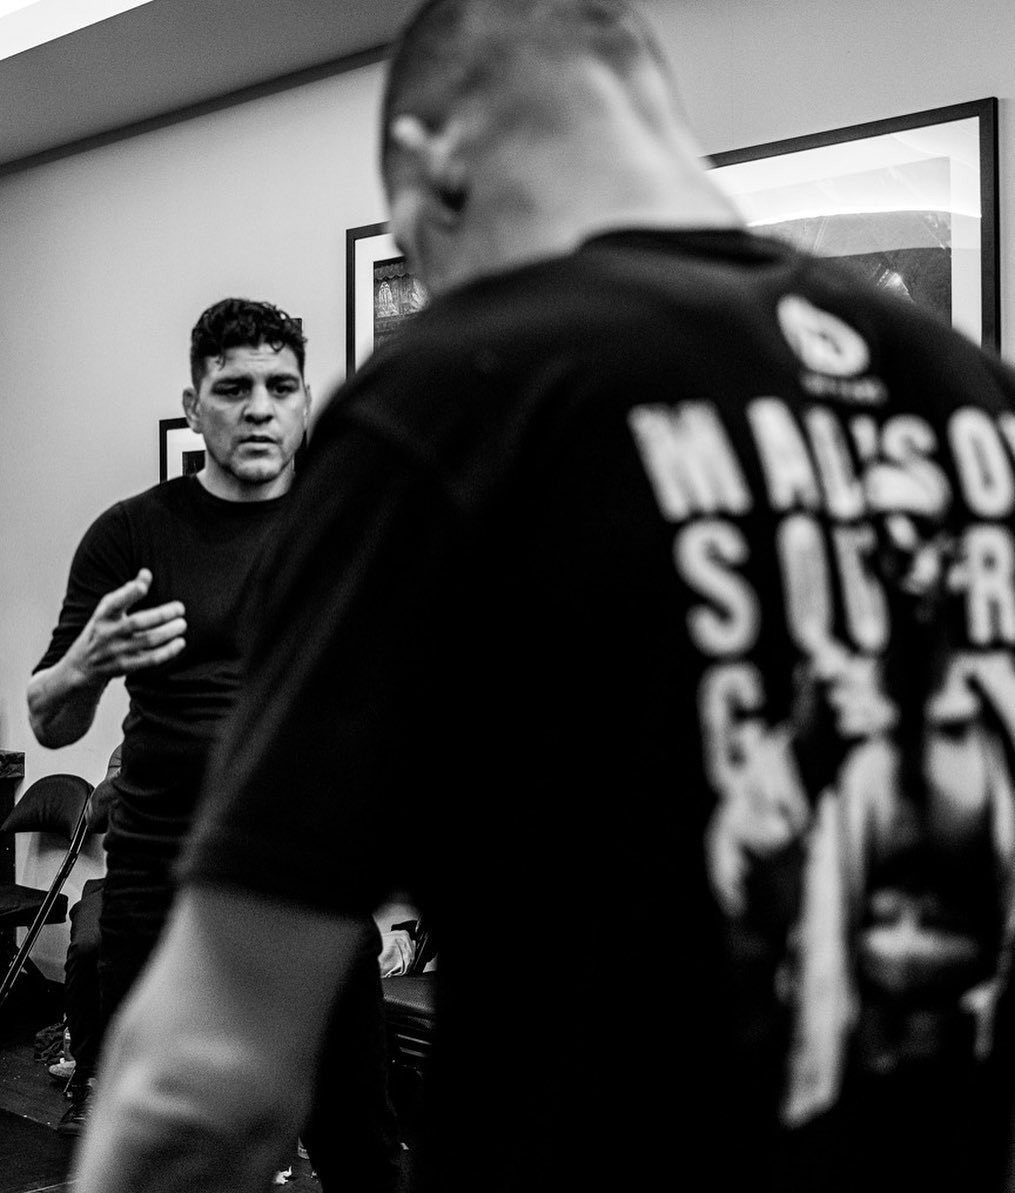 Nick Diaz (left) with his brother Nate Diaz. Photo: Instagram